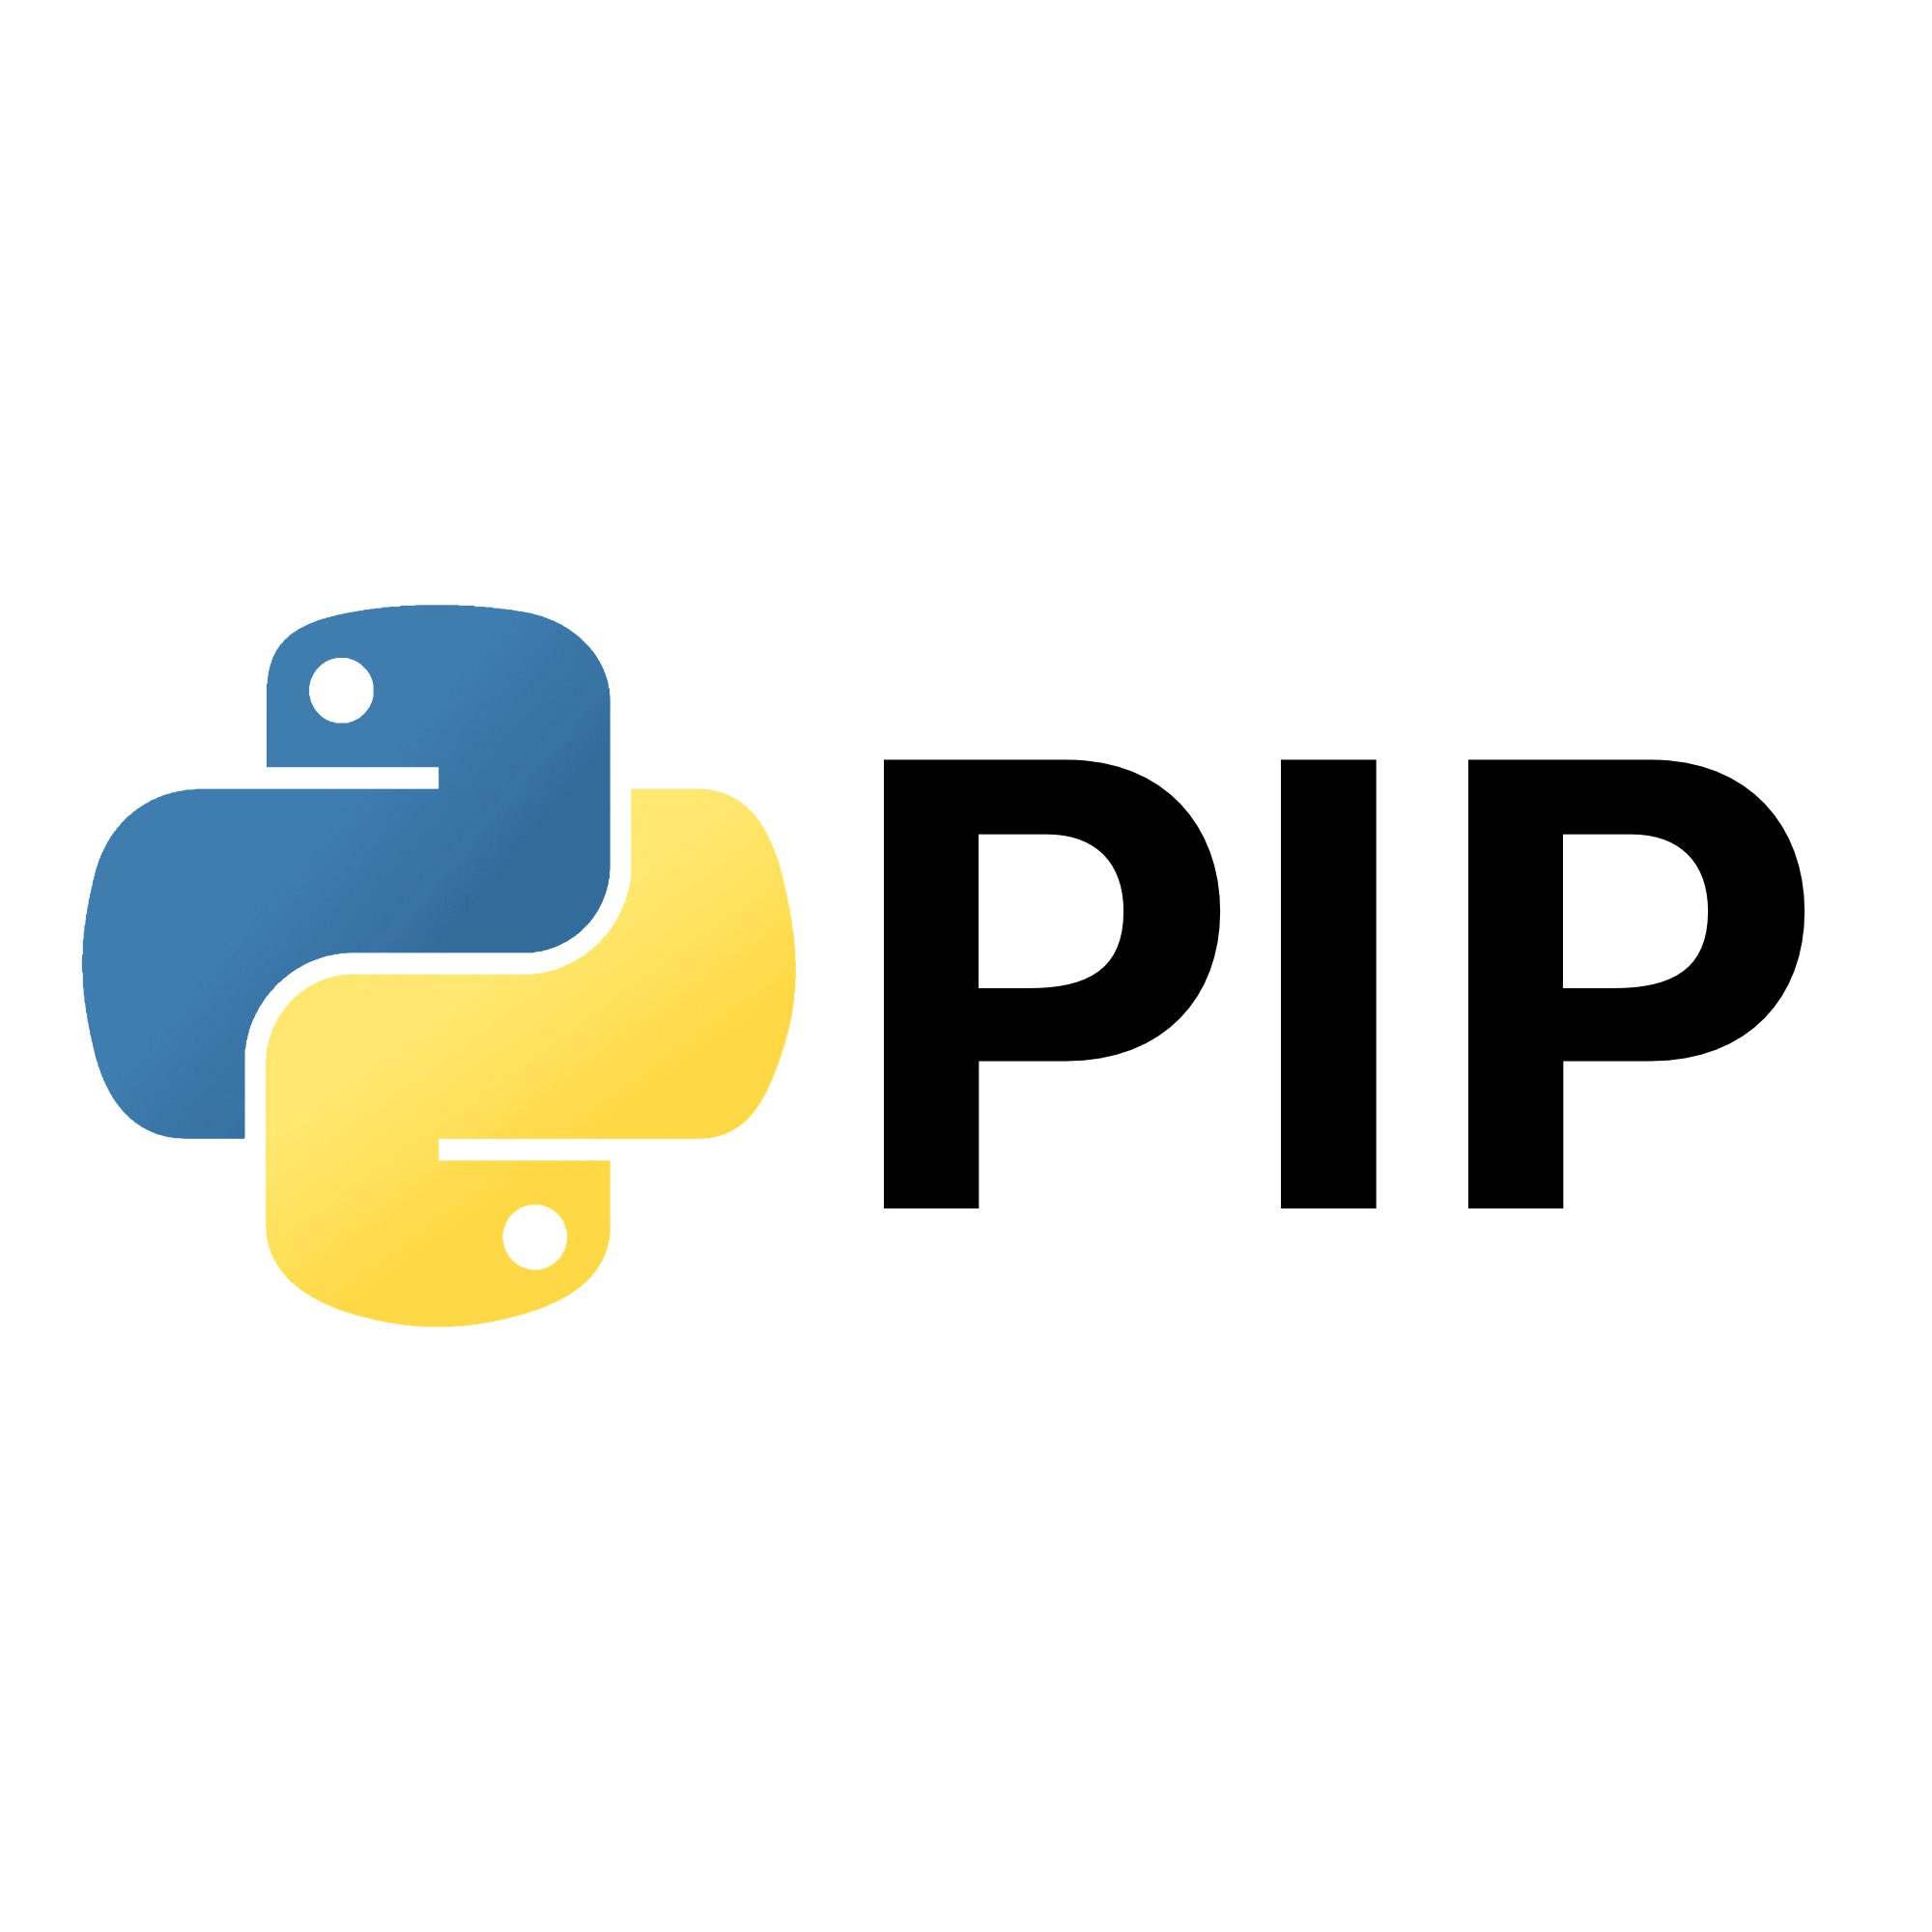 Using pip to install Python packages